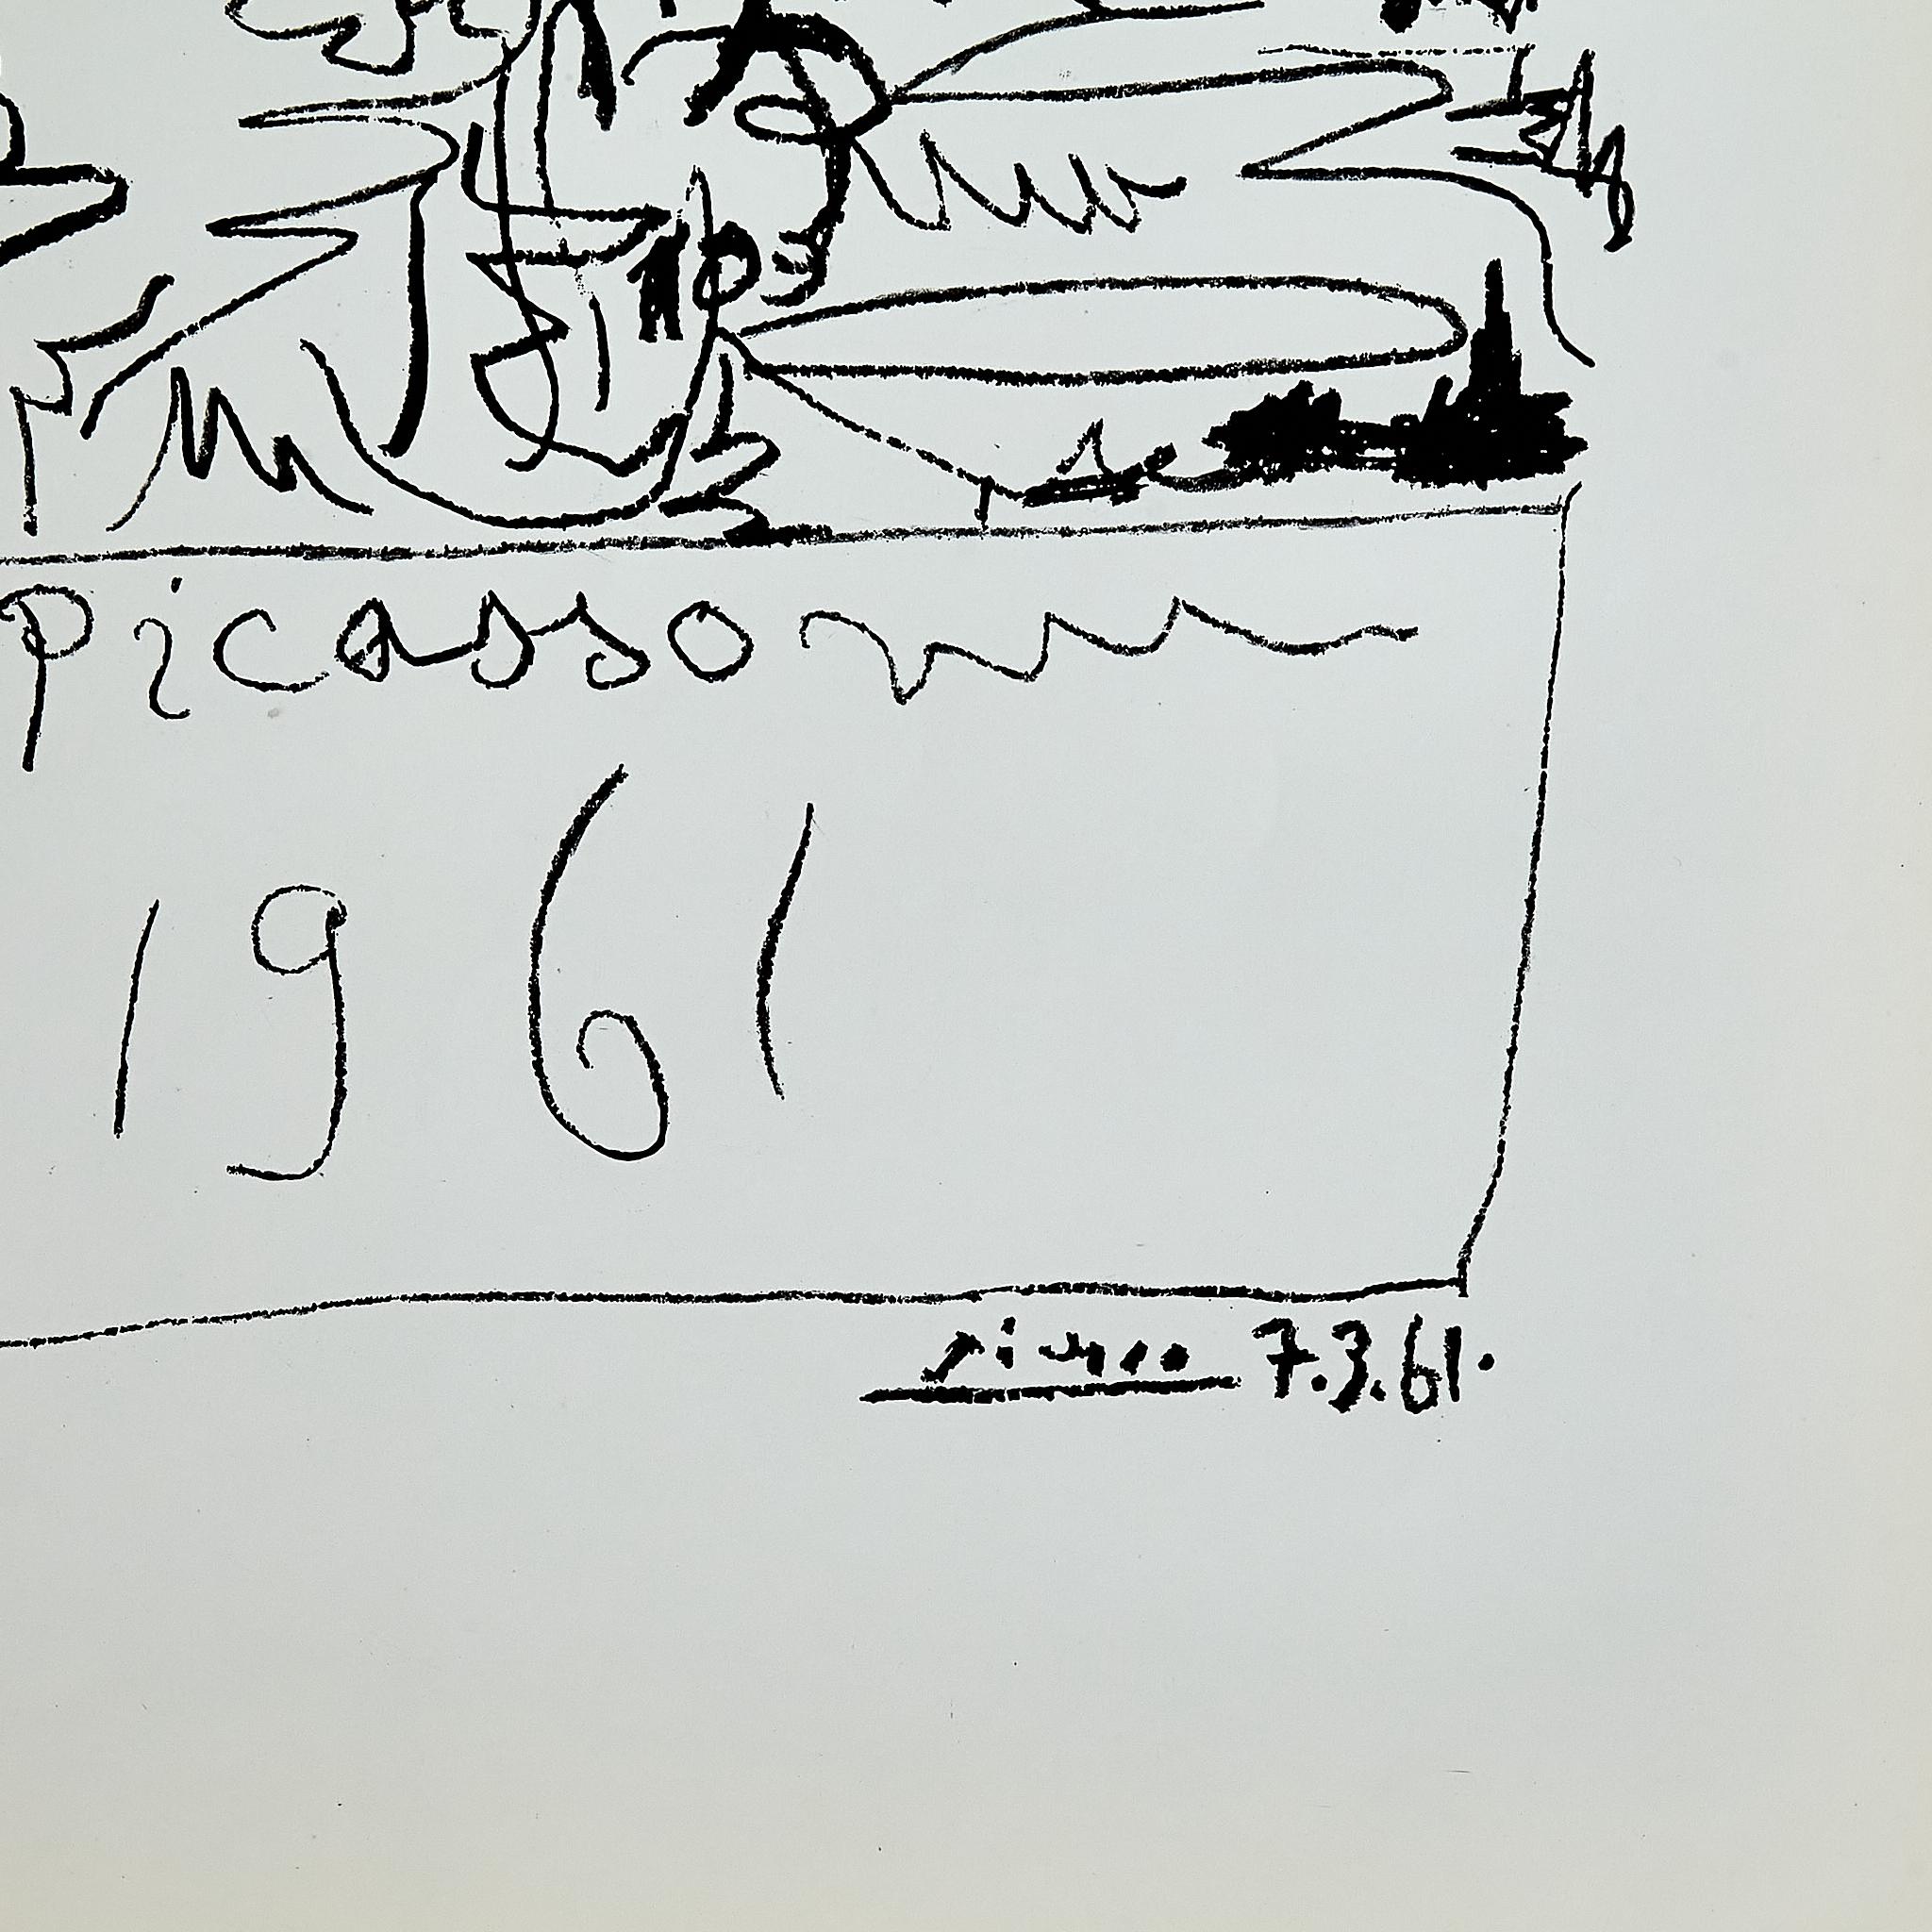 Spanish Historical Lithographic Poster of the exhibition Drawings by Picasso, circa 1961 For Sale